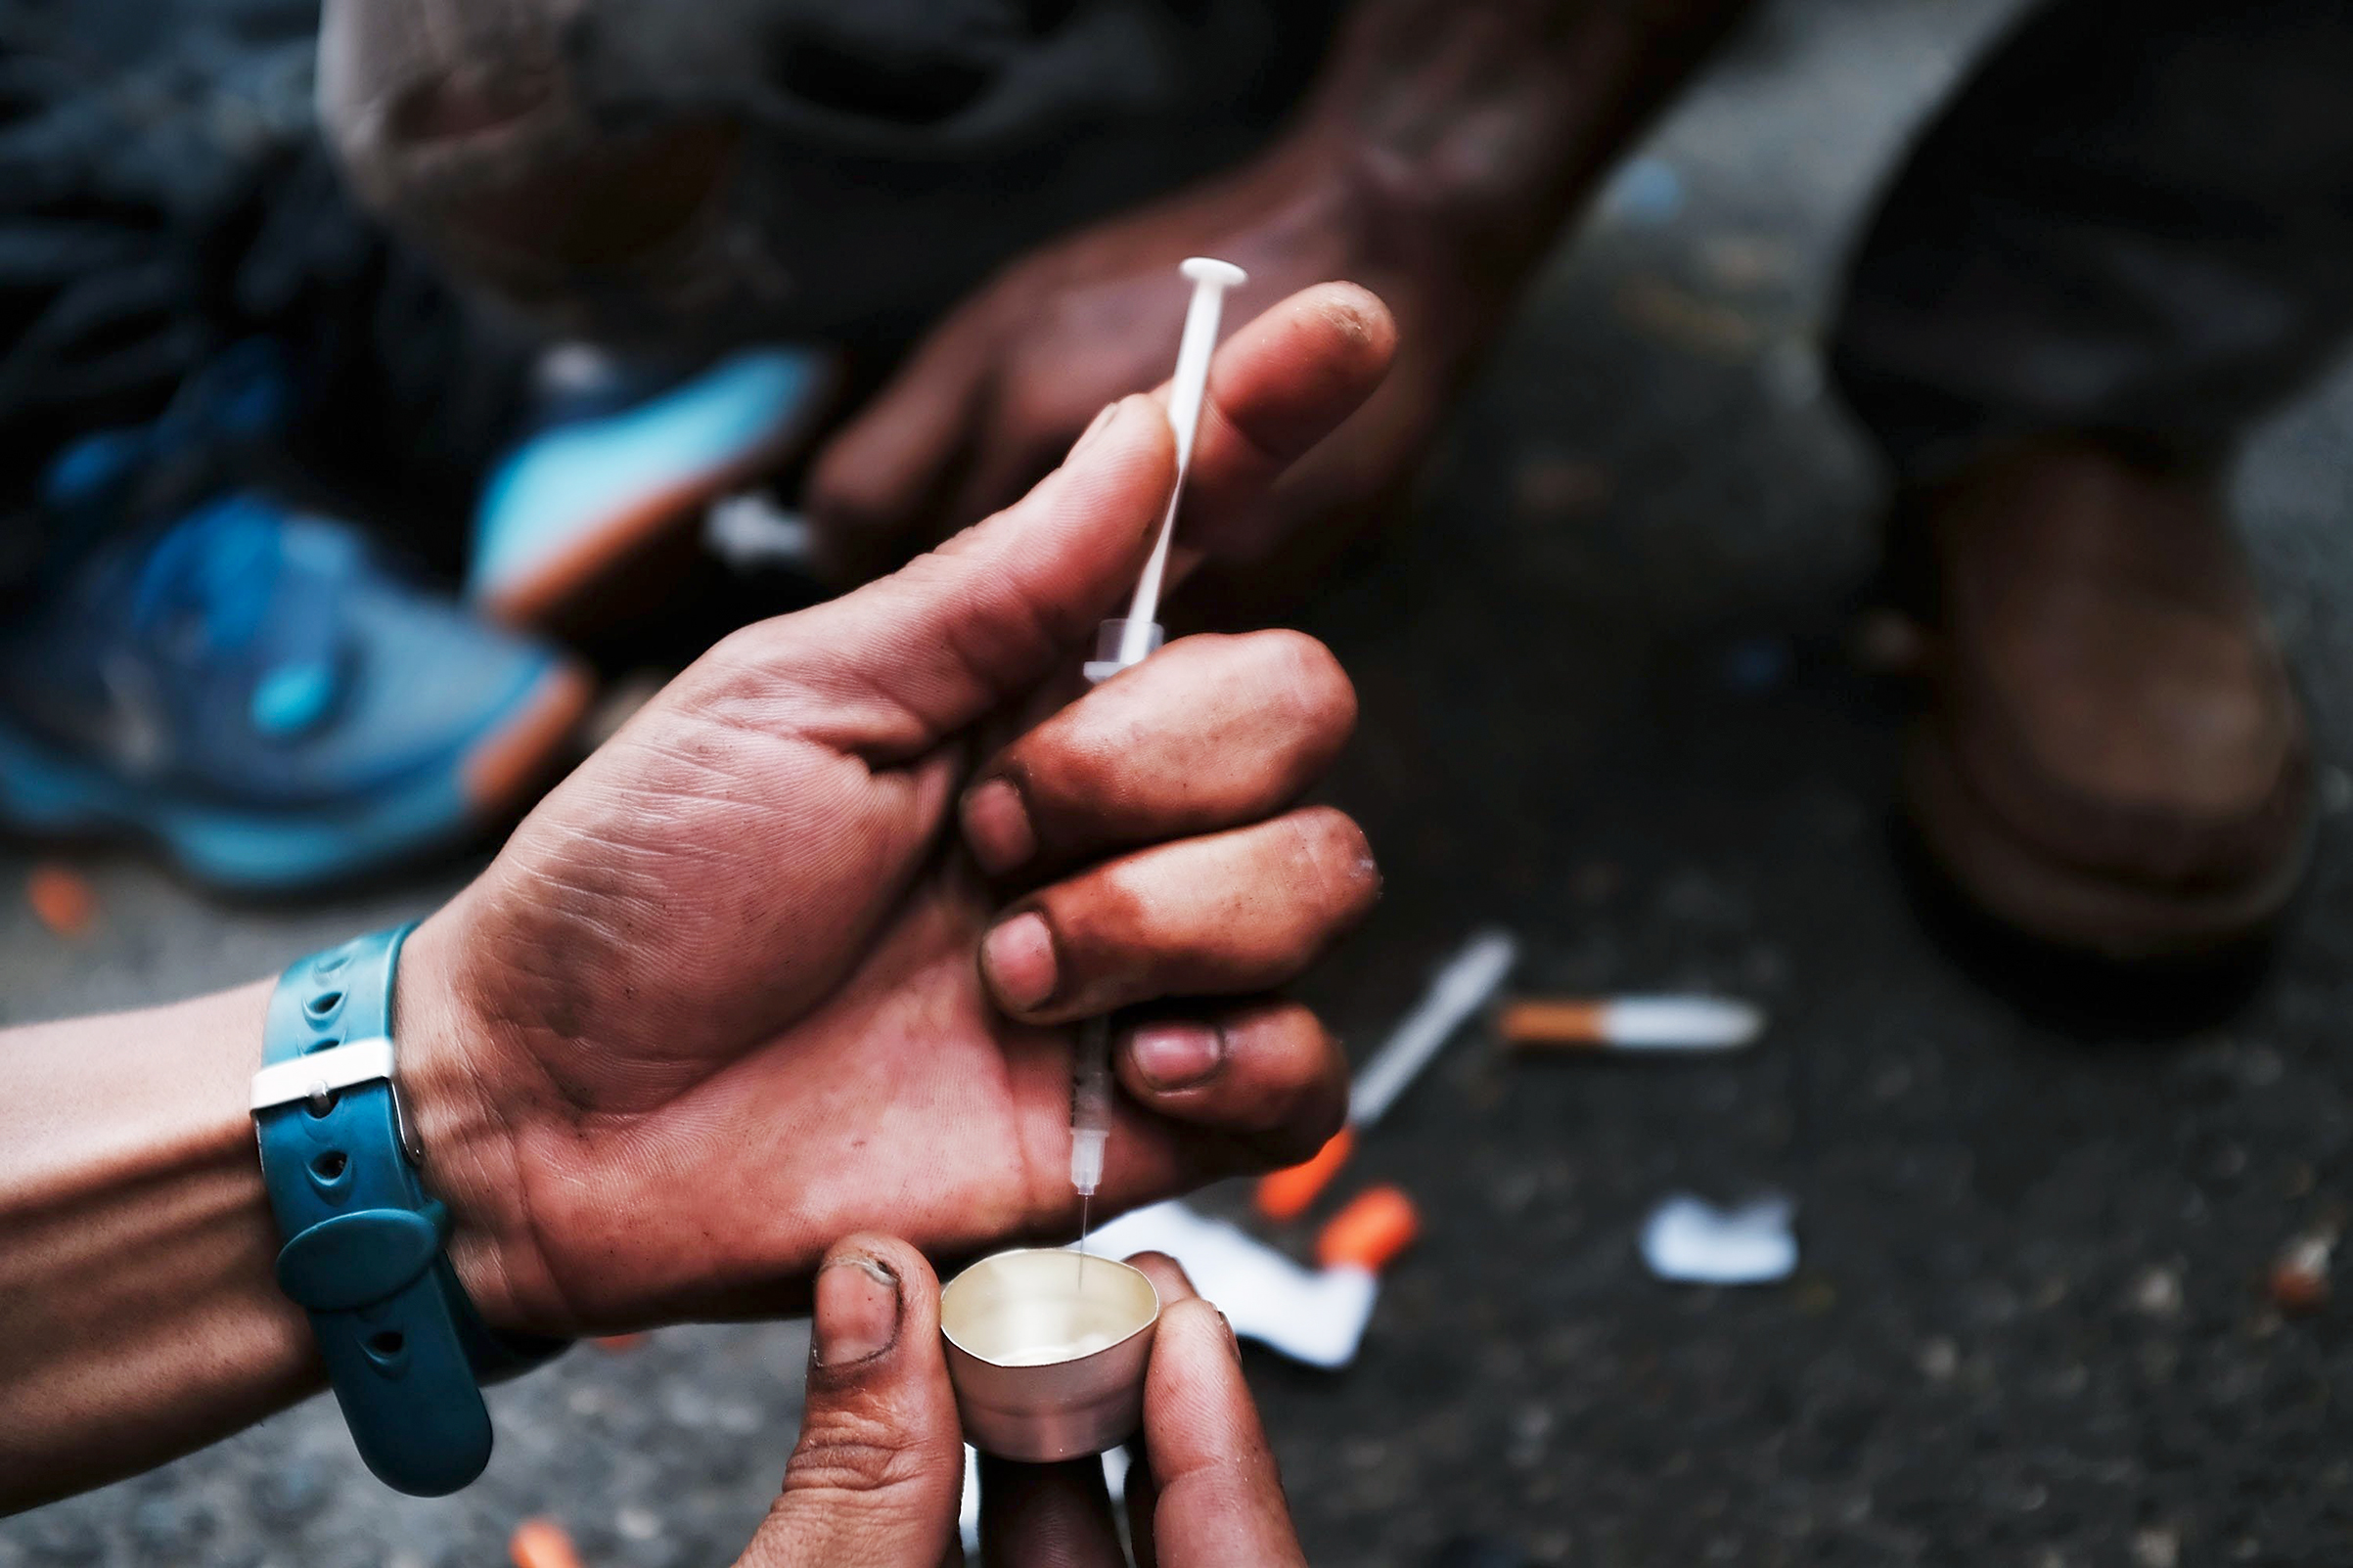 A user prepares to take heroin on a New York City street in the South Bronx on Oct. 7 (Spencer Platt—Getty Images)